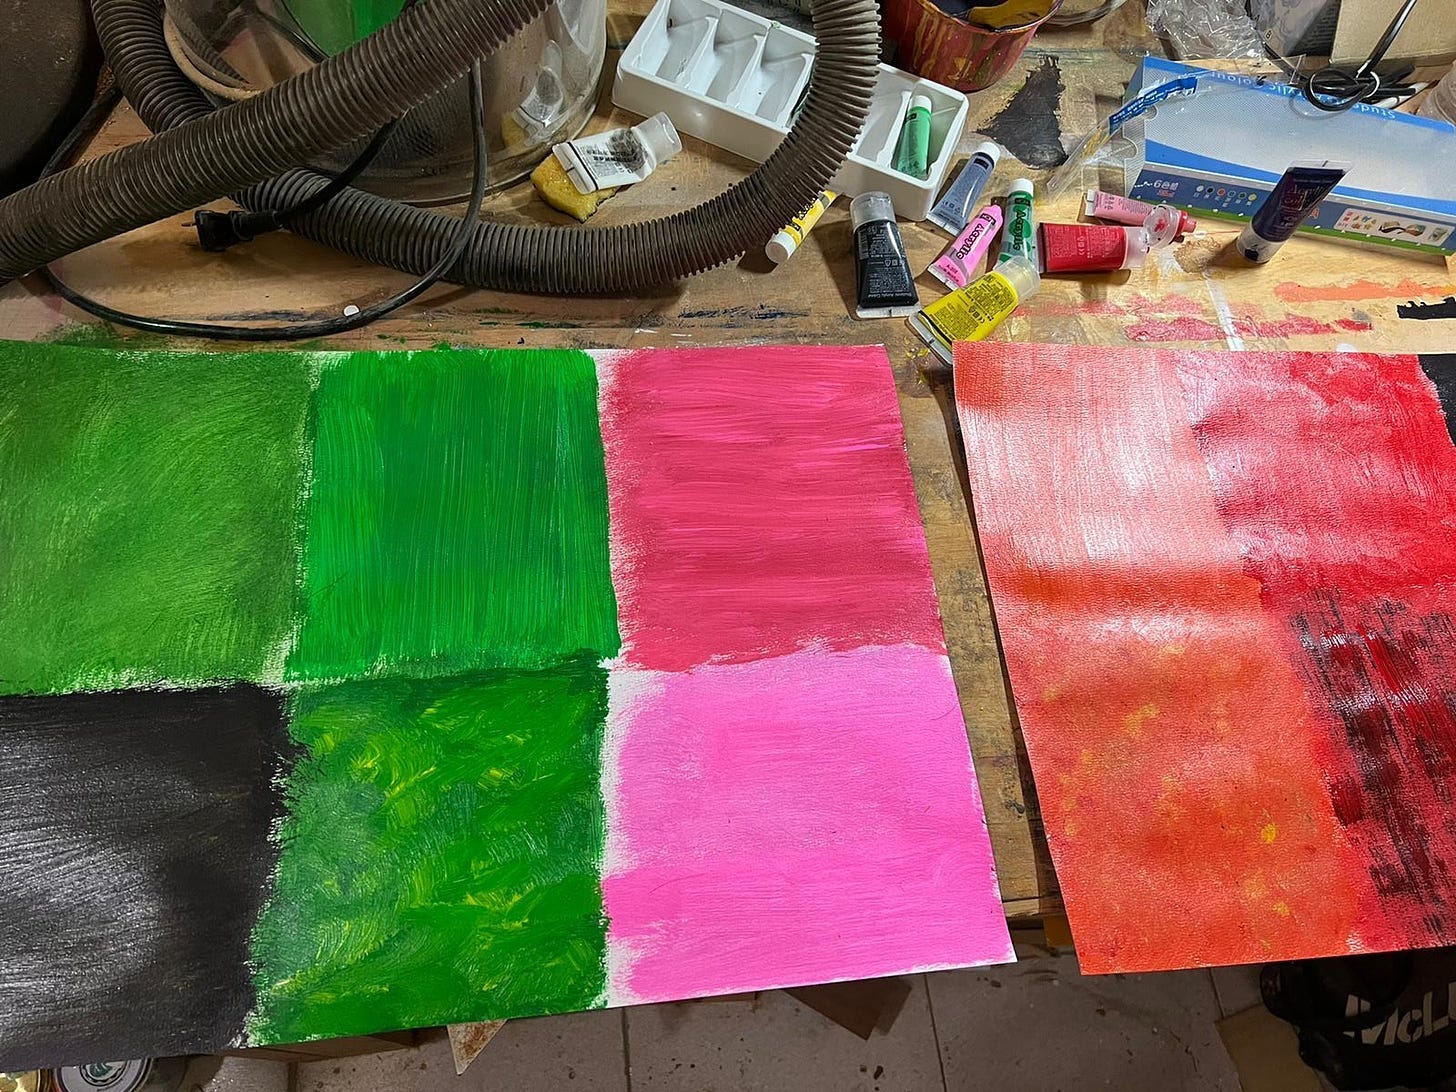 A workshop with more colored painted pallets